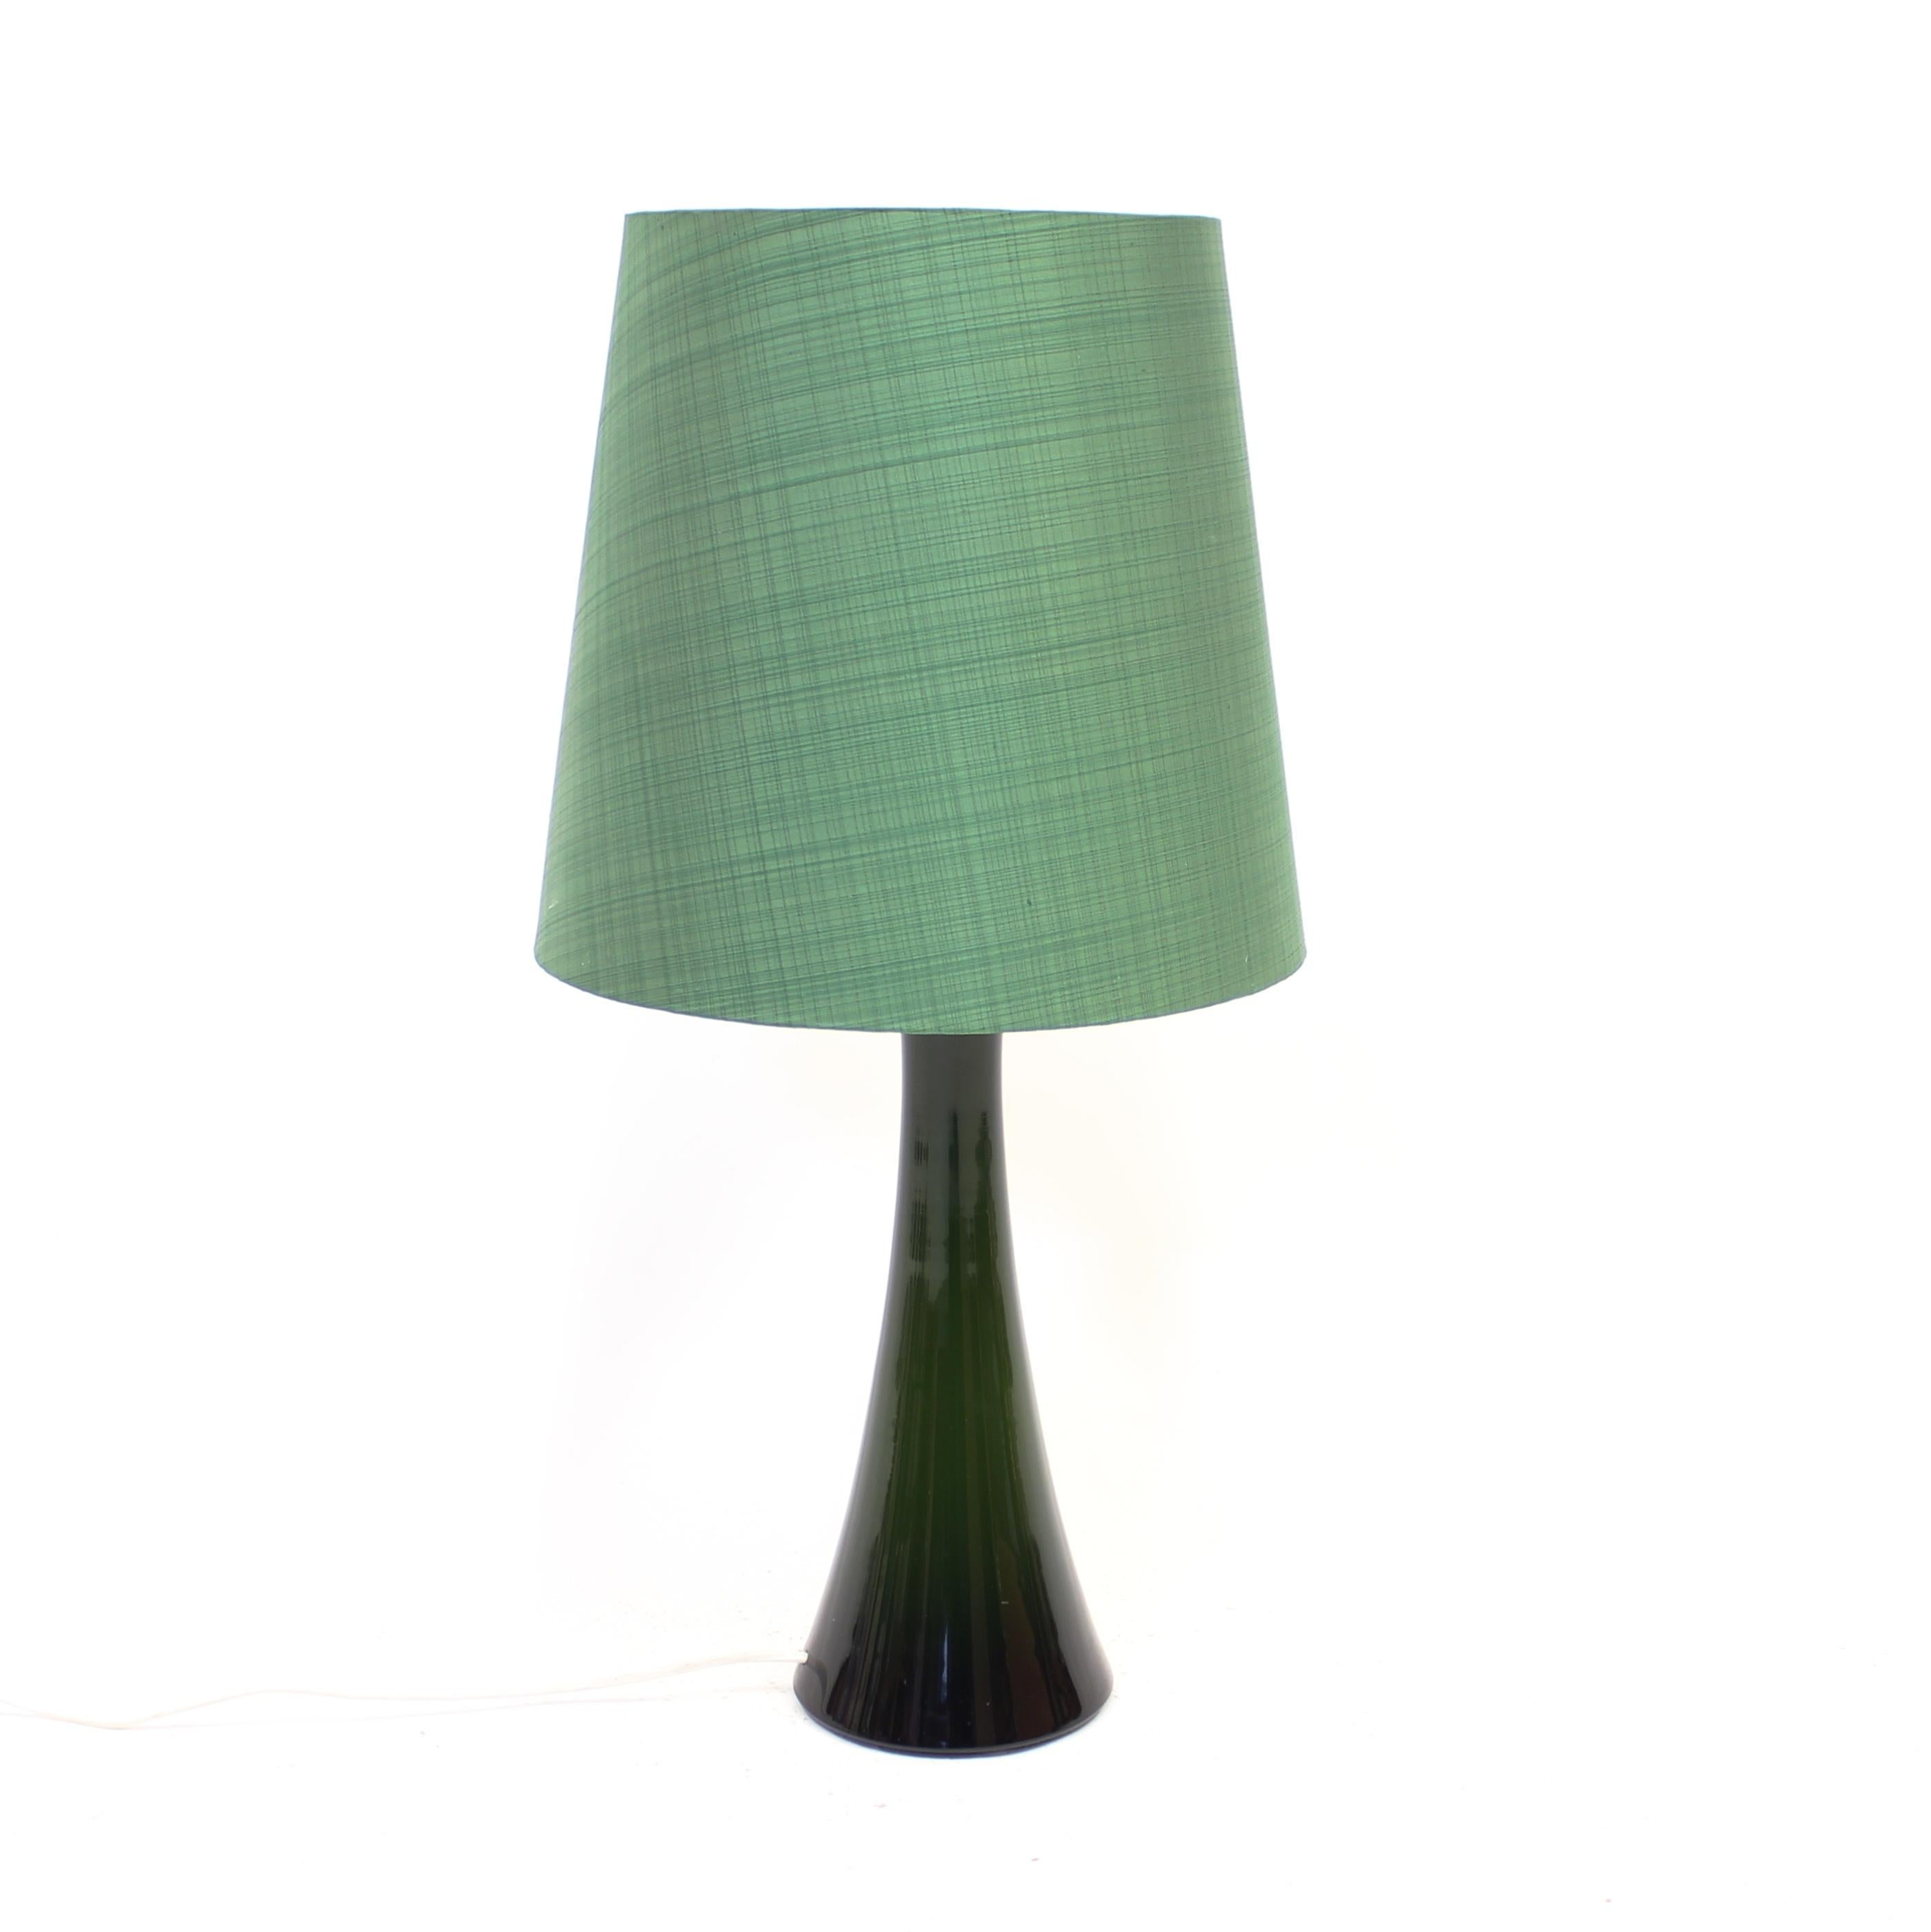 Green glass table lamp with a teak top and green shade by Swedish manufacturer Bergboms. Made in the 1960s. Marked with sticker from manufacturer on the bottom. Very good vintage condition with light ware consistent with age and use.